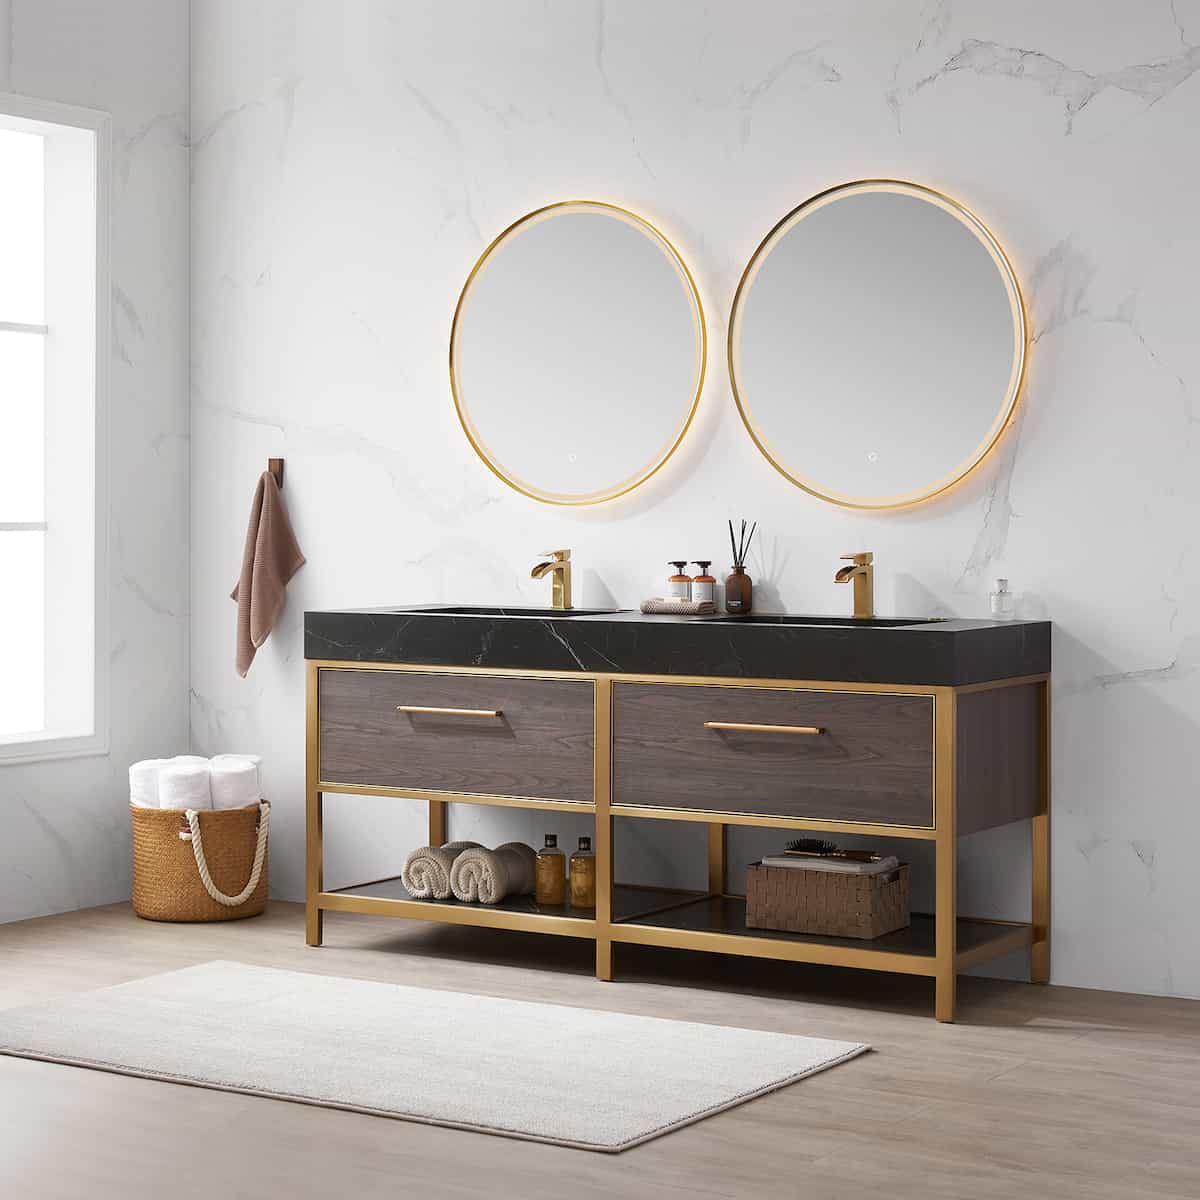 Vinnova Segovia 72 Inch Freestanding Double Sink Bath Vanity in Suleiman Oak with Black Sintered Stone Top With Mirrors Side 702072-SO-SL #mirror_with mirror